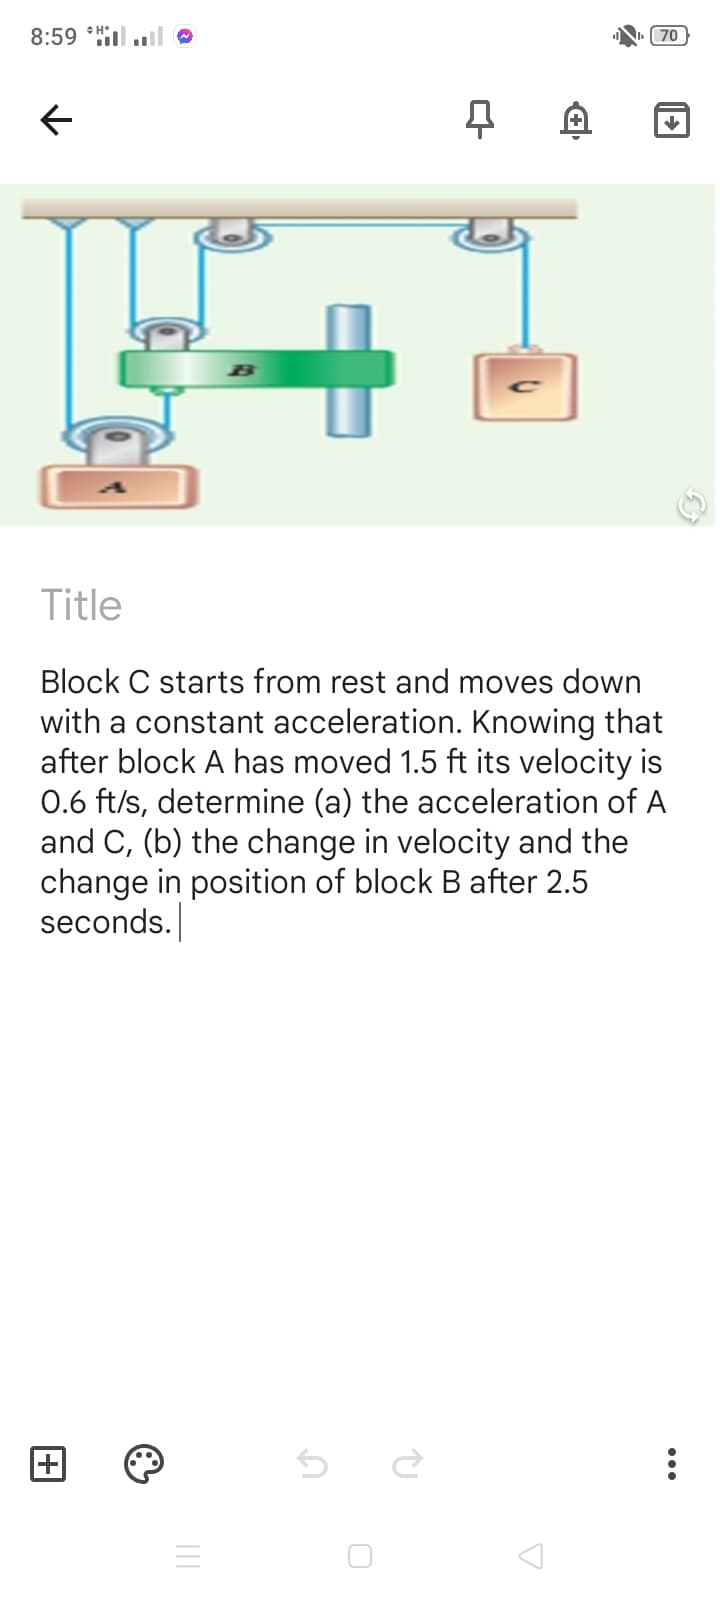 8:59 *Hl.l
(70
Title
Block C starts from rest and moves down
with a constant acceleration. Knowing that
after block A has moved 1.5 ft its velocity is
0.6 ft/s, determine (a) the acceleration of A
and C, (b) the change in velocity and the
change in position of block B after 2.5
seconds.
